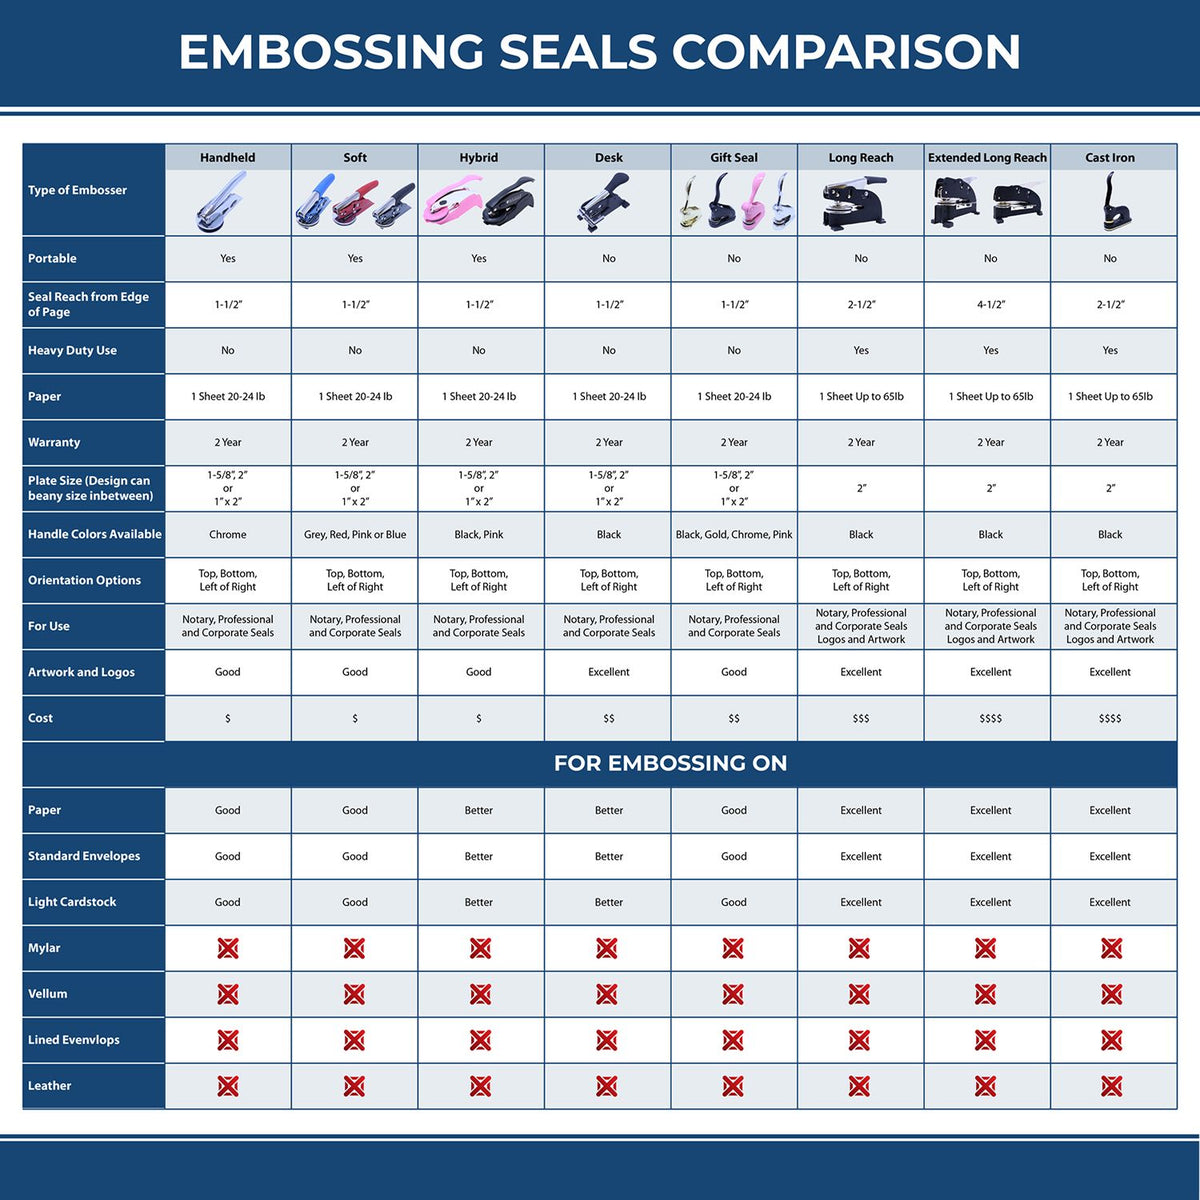 A comparison chart for the different types of mount models available for the Extended Long Reach Florida Architect Seal Embosser.